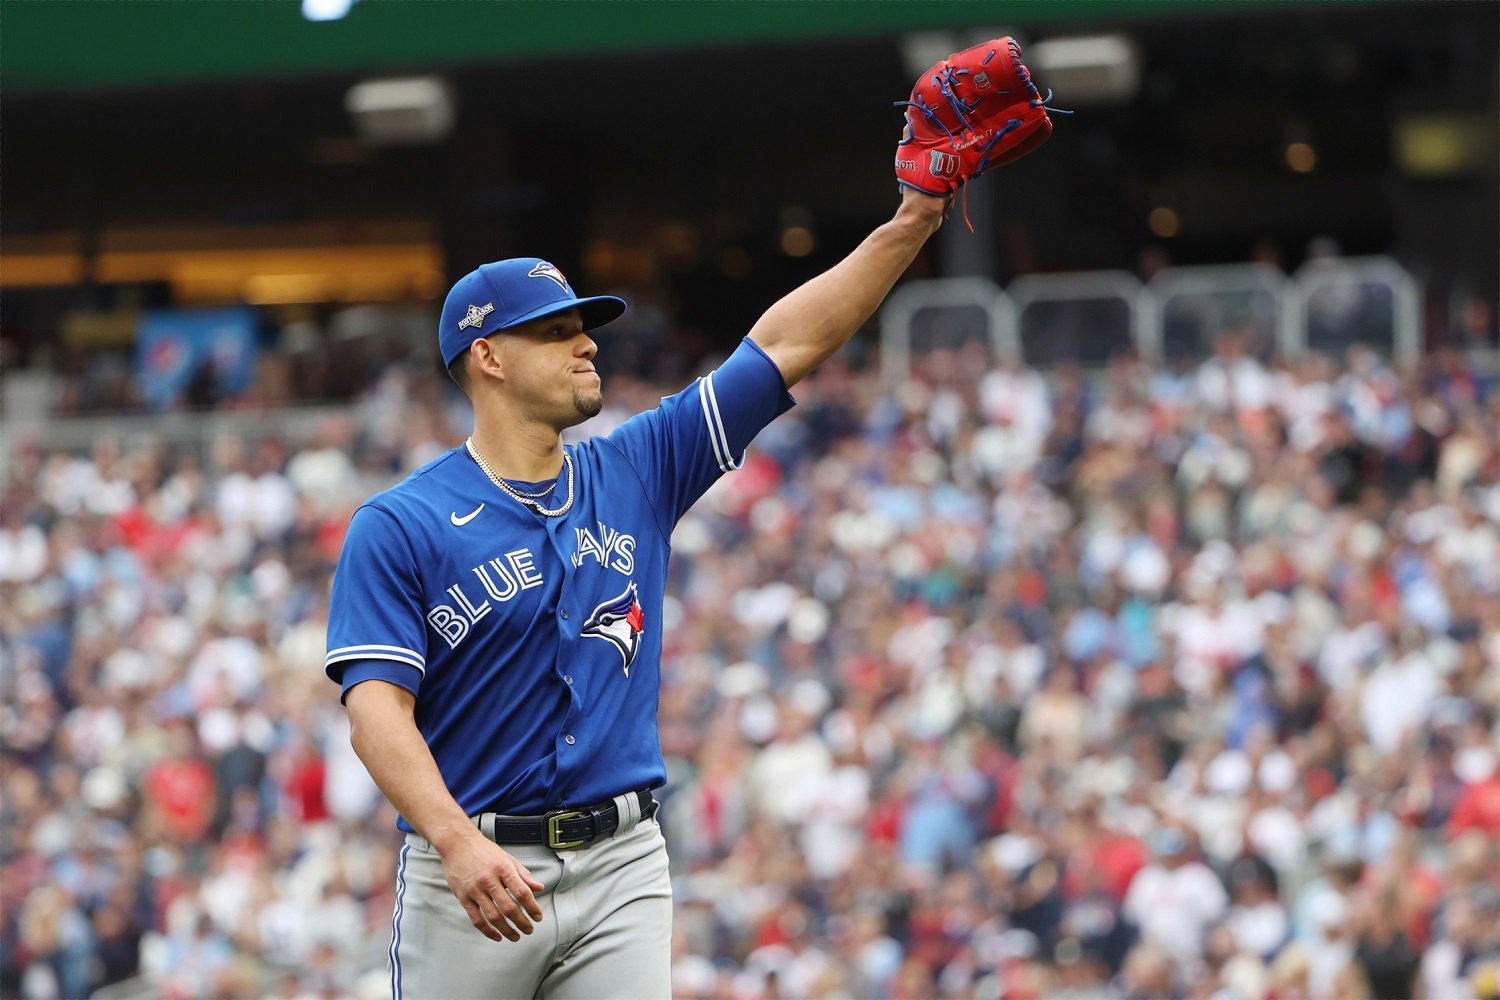 This stat led the Blue Jays to hate their red Sunday jerseys